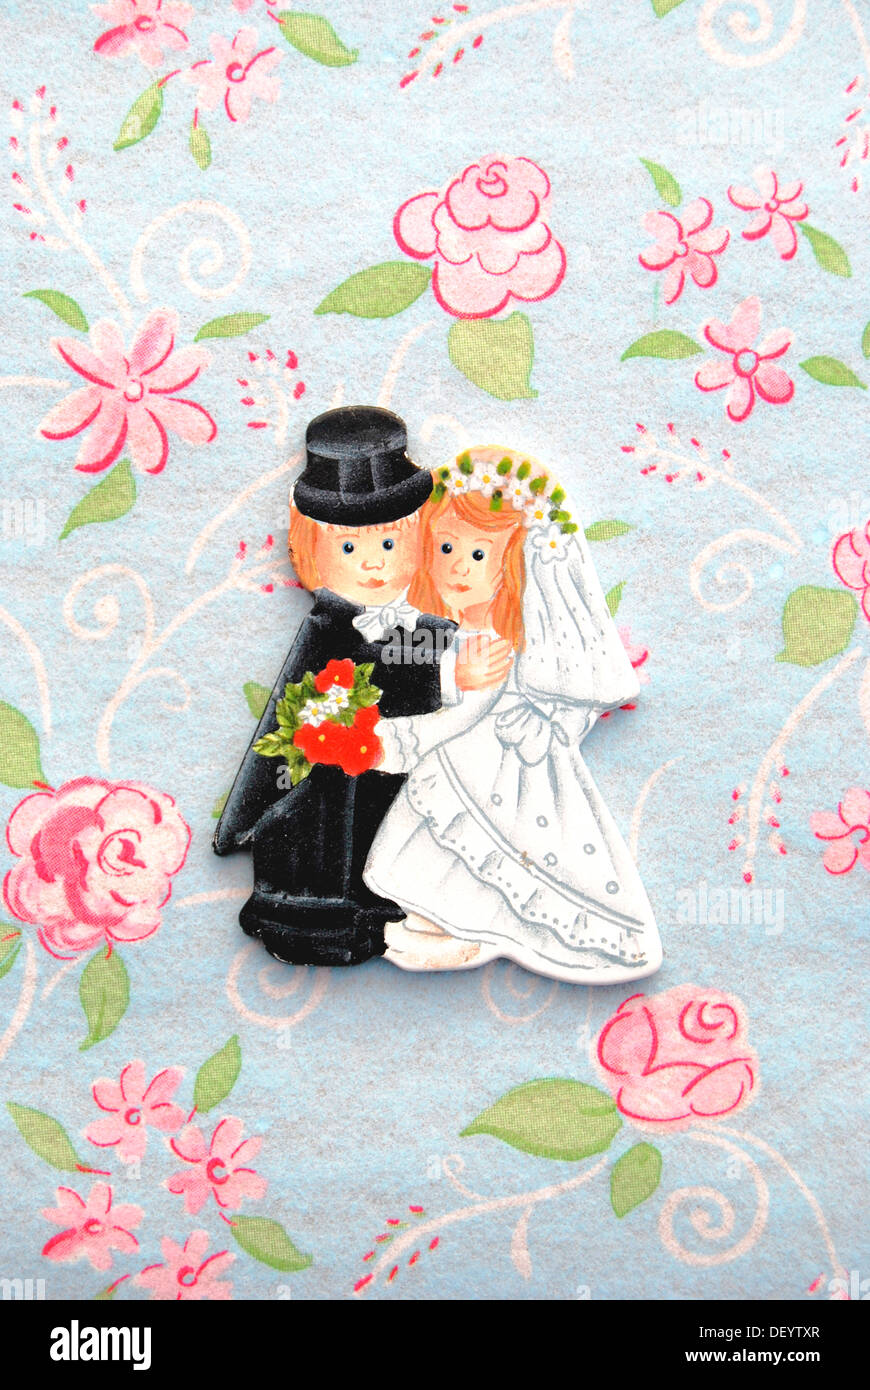 Bride and groom, table decorations on a floral tablecloth Stock Photo